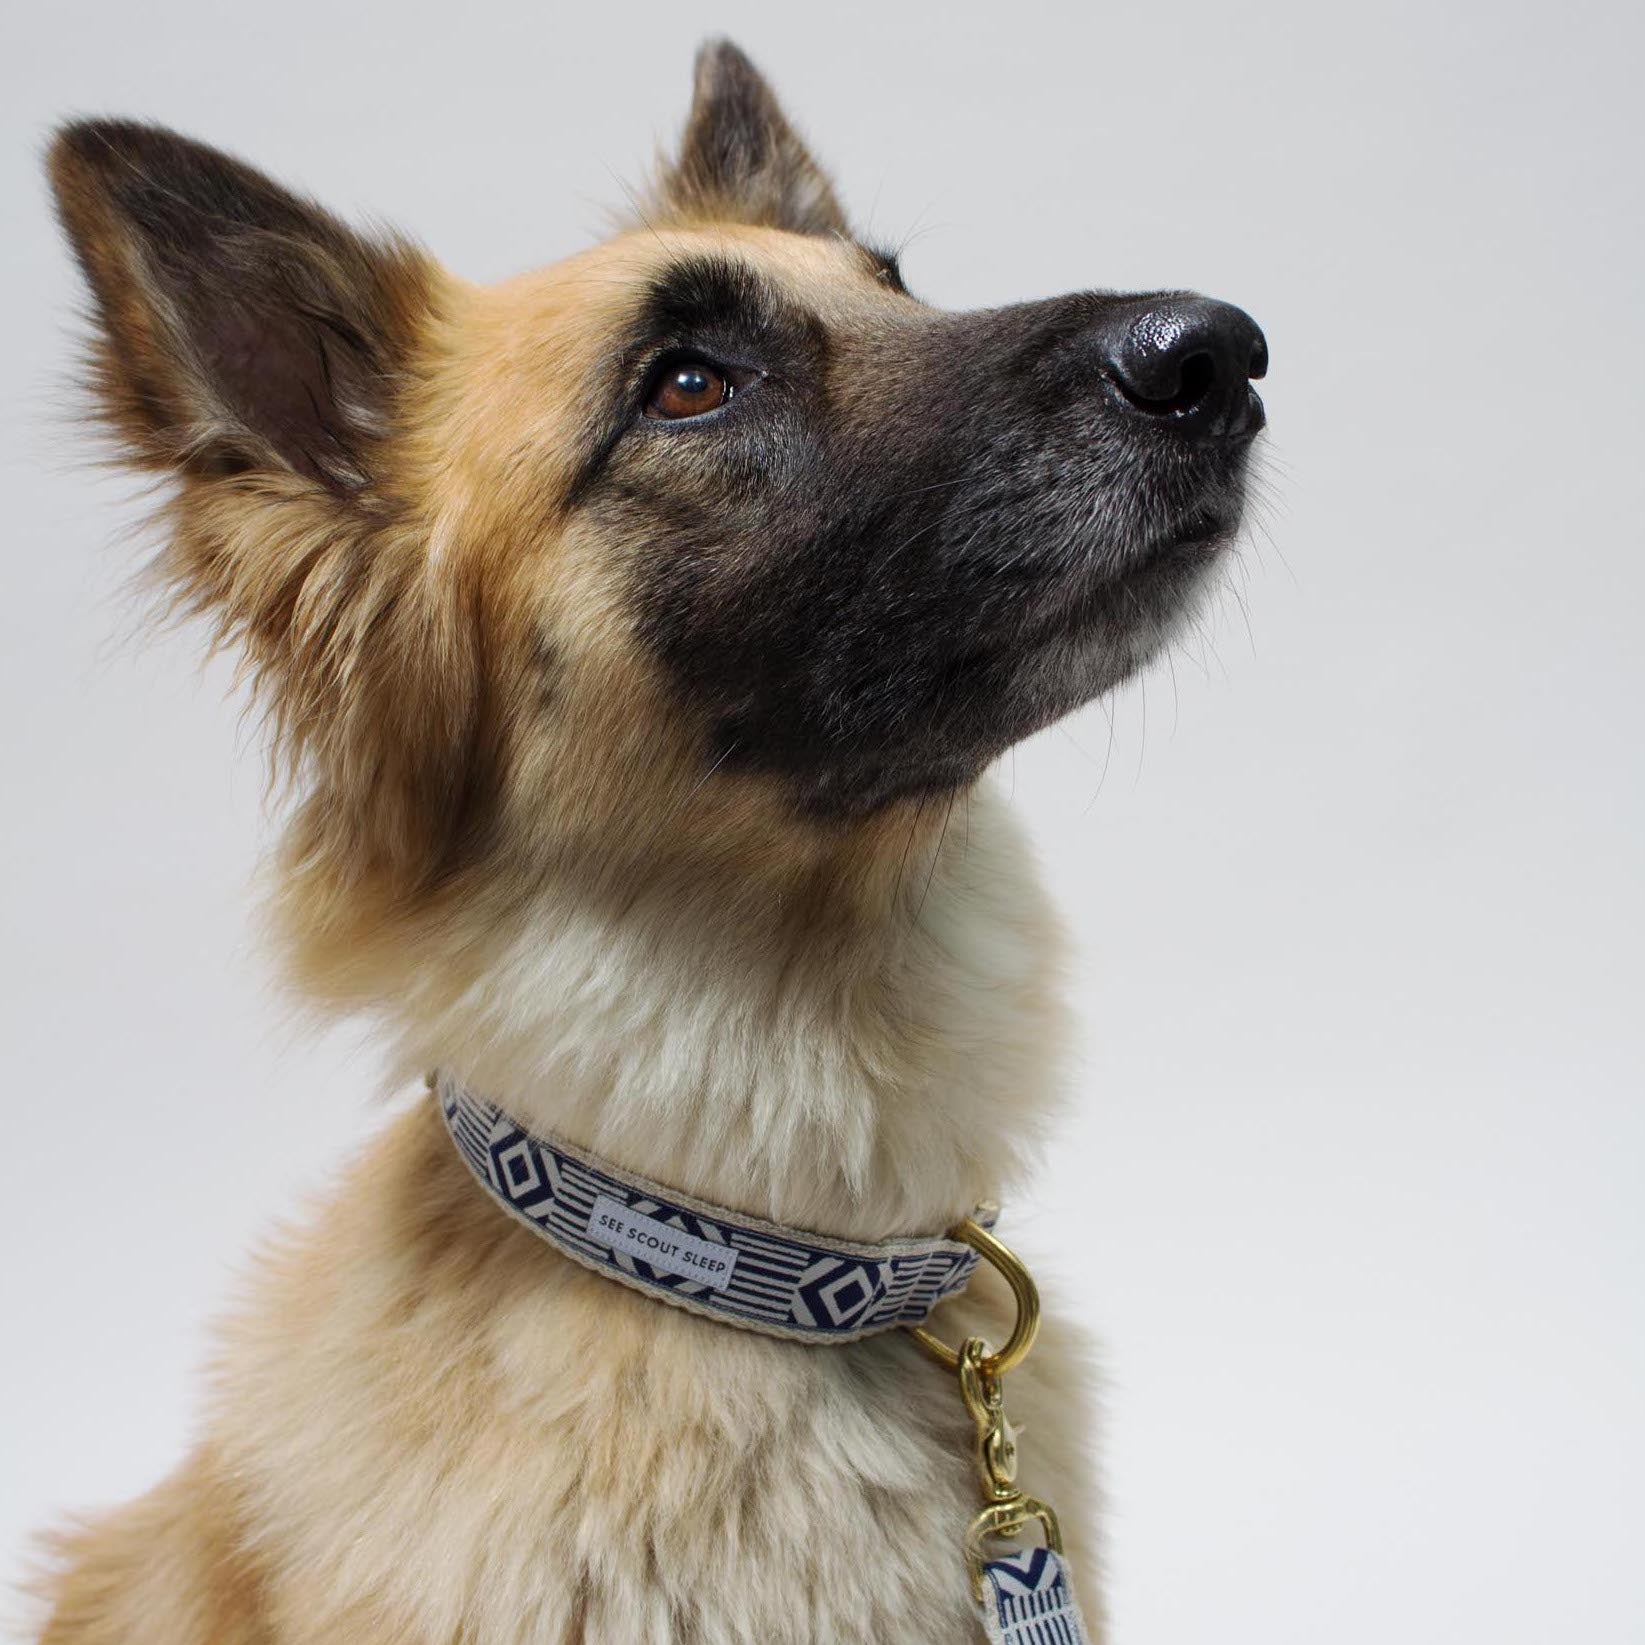 Out Of My Box Dog Collar - Navy & Cream - NEW PETS ON THE BLOCK.COM